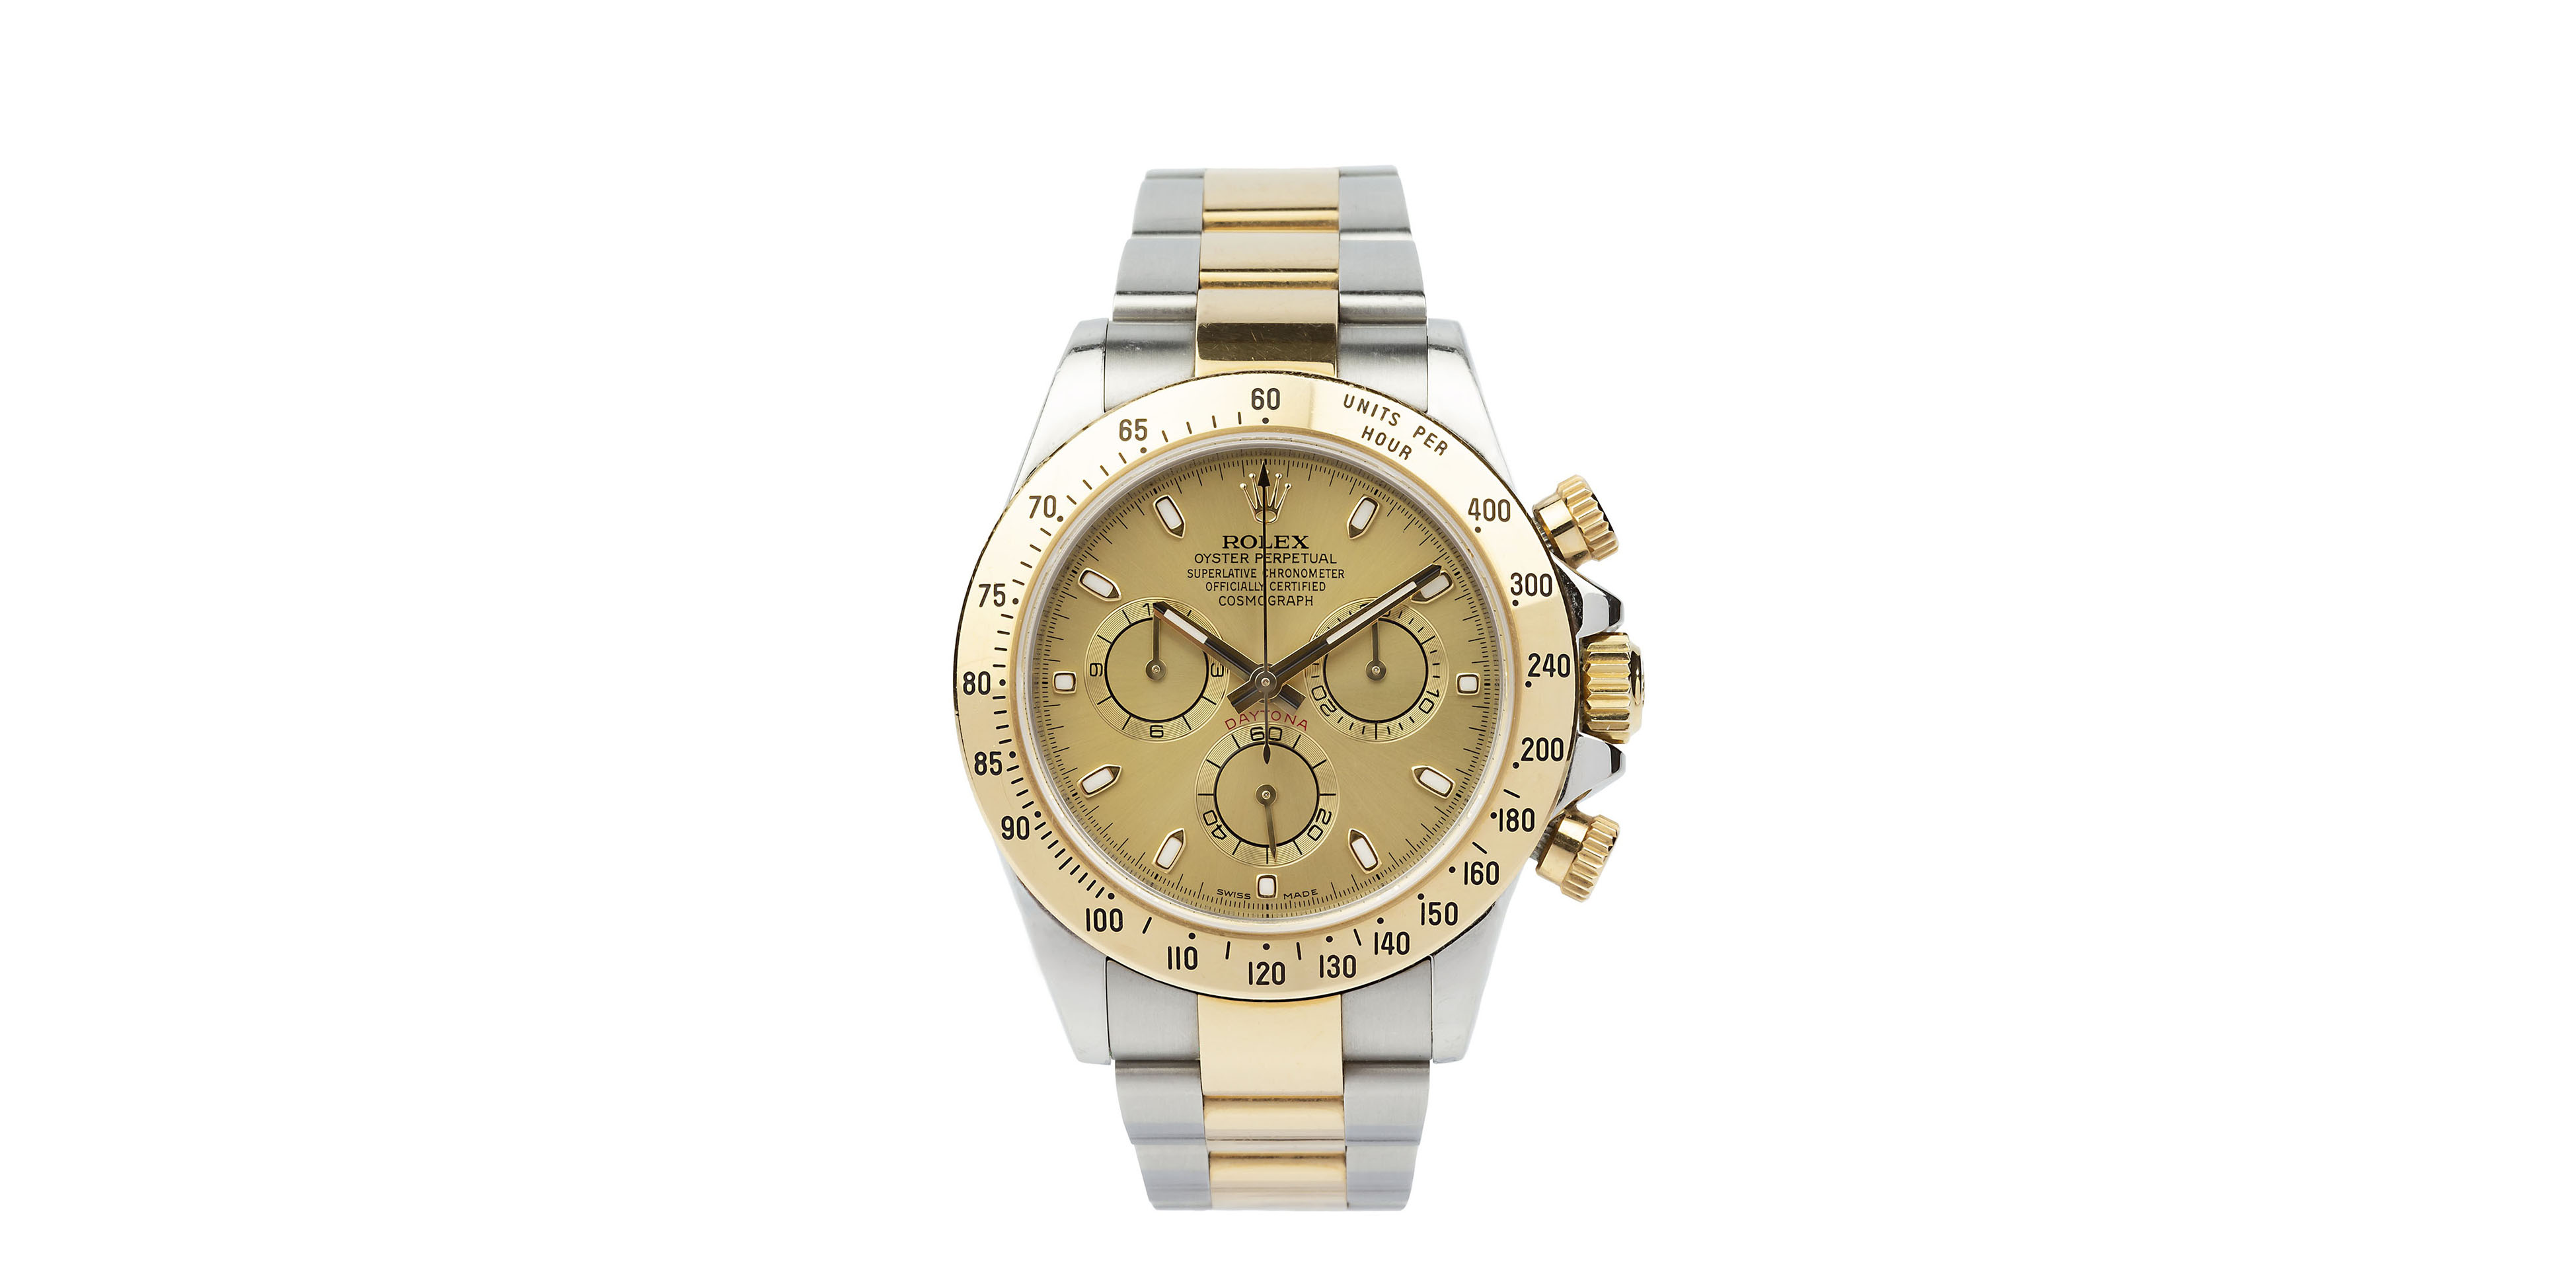 Rolex Daytona sells for almost double top estimate at Mallams’ Jewellery, Watches and Silver Sale